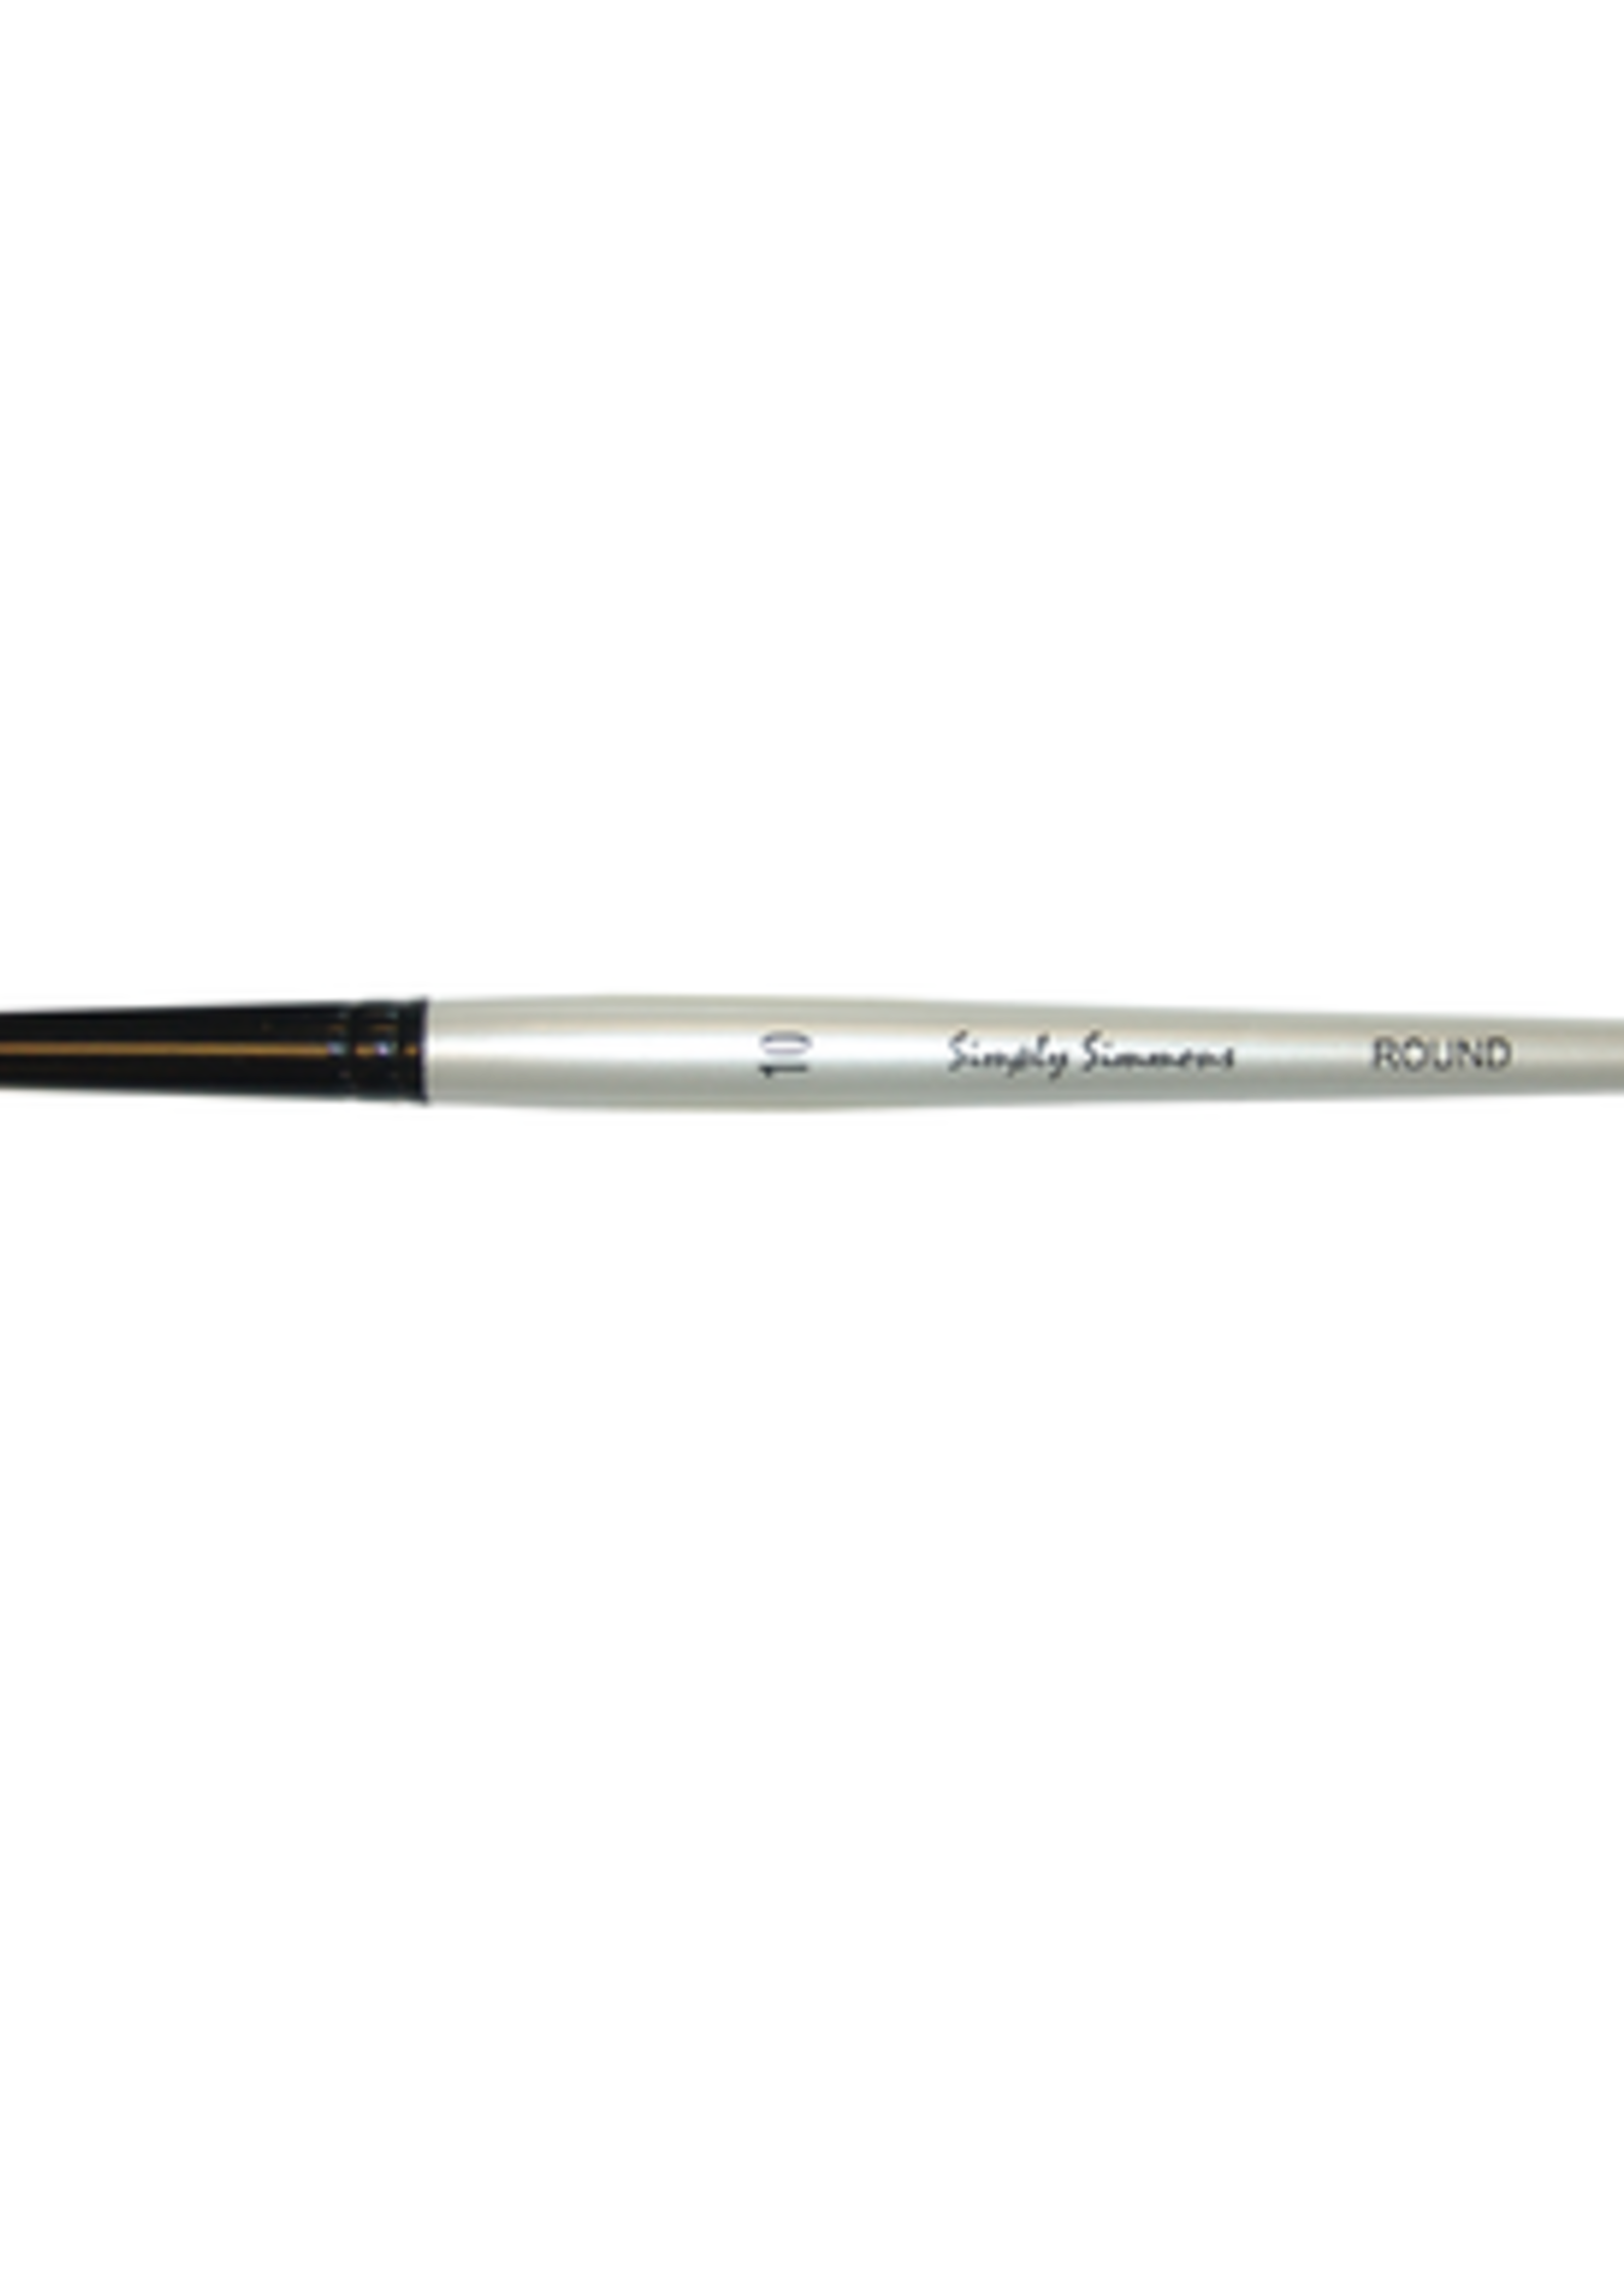 DALER-ROWNEY/FILA CO SIMPLY SIMMONS ROUND BRUSHES